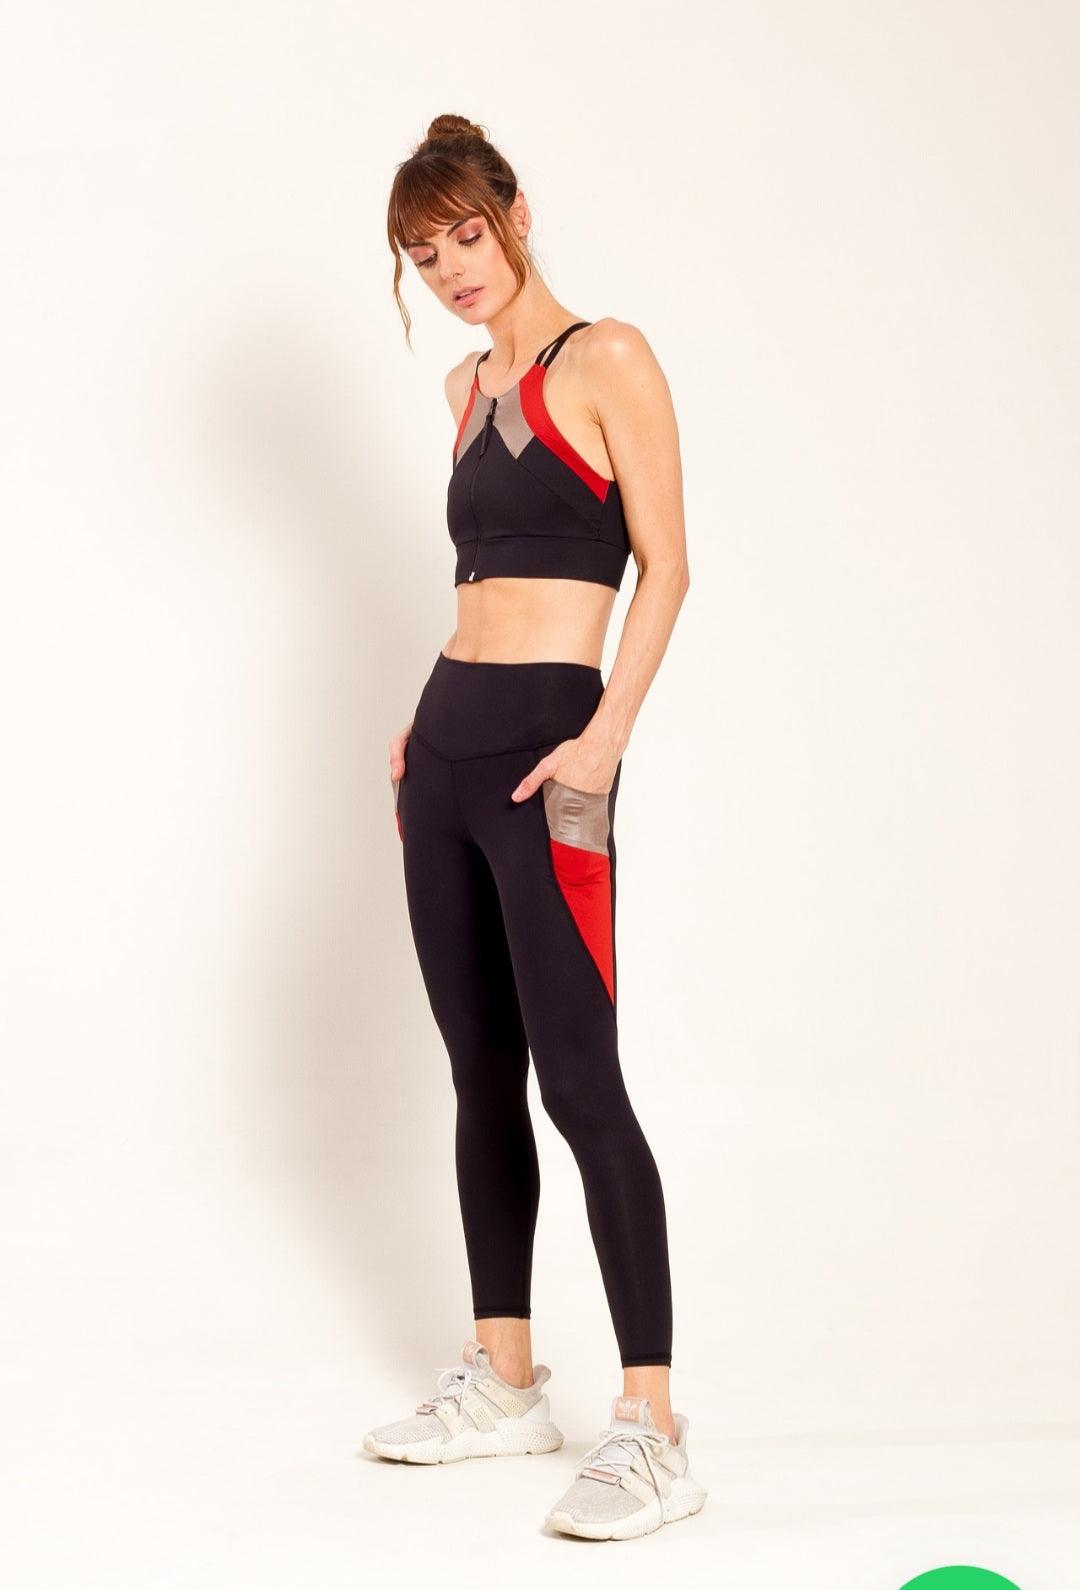 Vivacolor Activewear Leggings Shop Luca High-Waisted Black Leggings: Premium Gym and Everyday Comfort | Available in Red and Black or All Black - Get Fit in Style